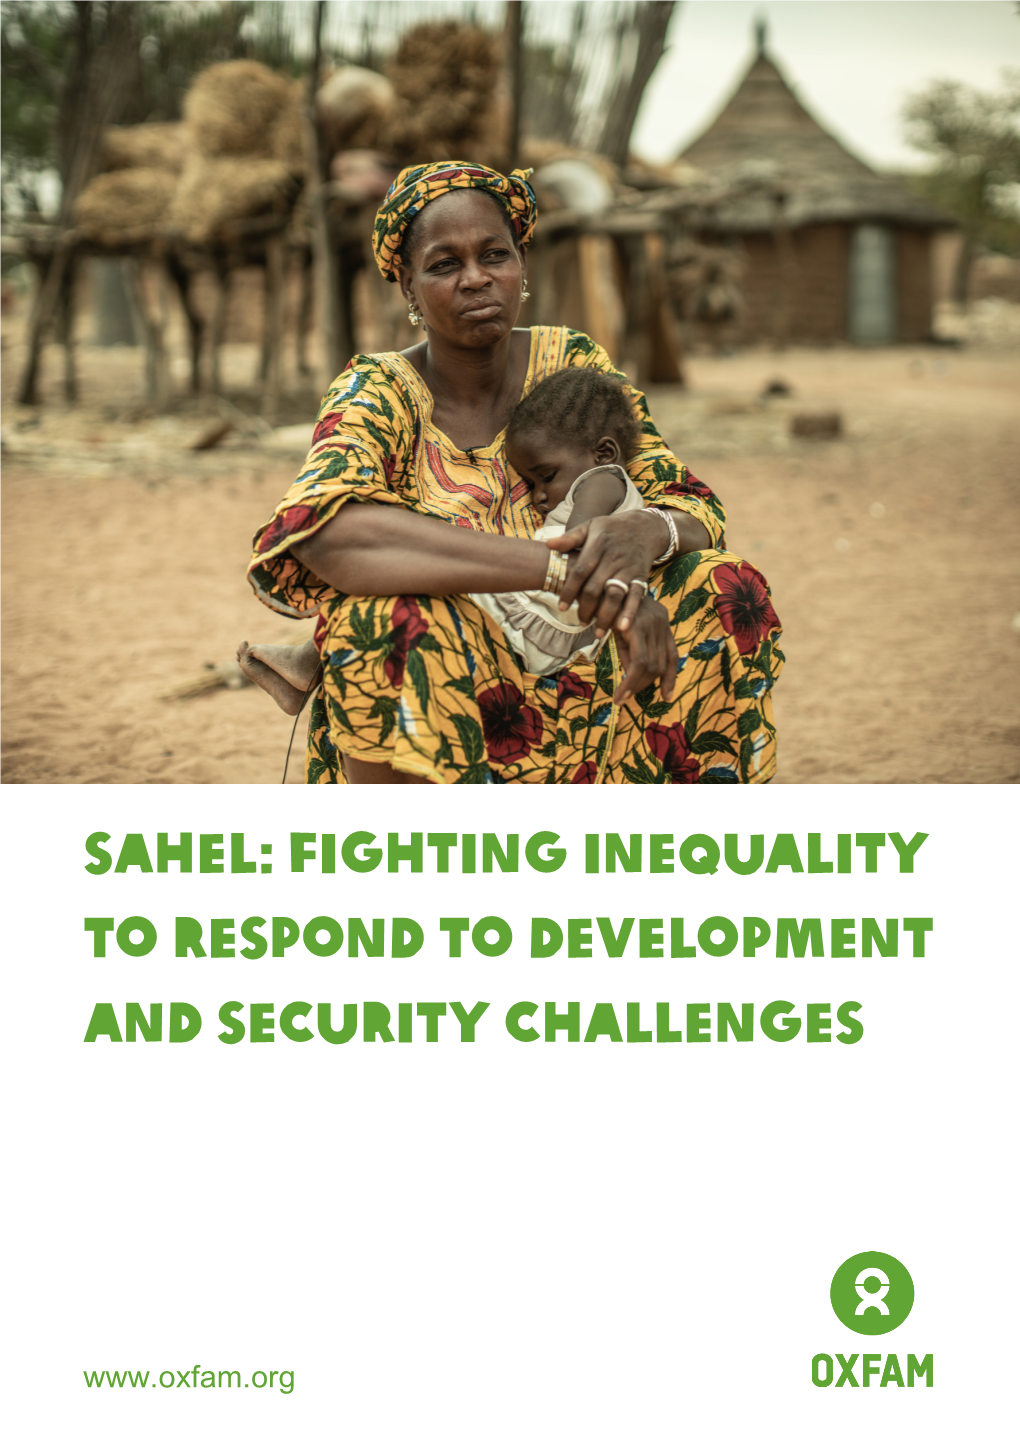 Sahel: Fighting Inequality to Respond to Development and Security Challenges